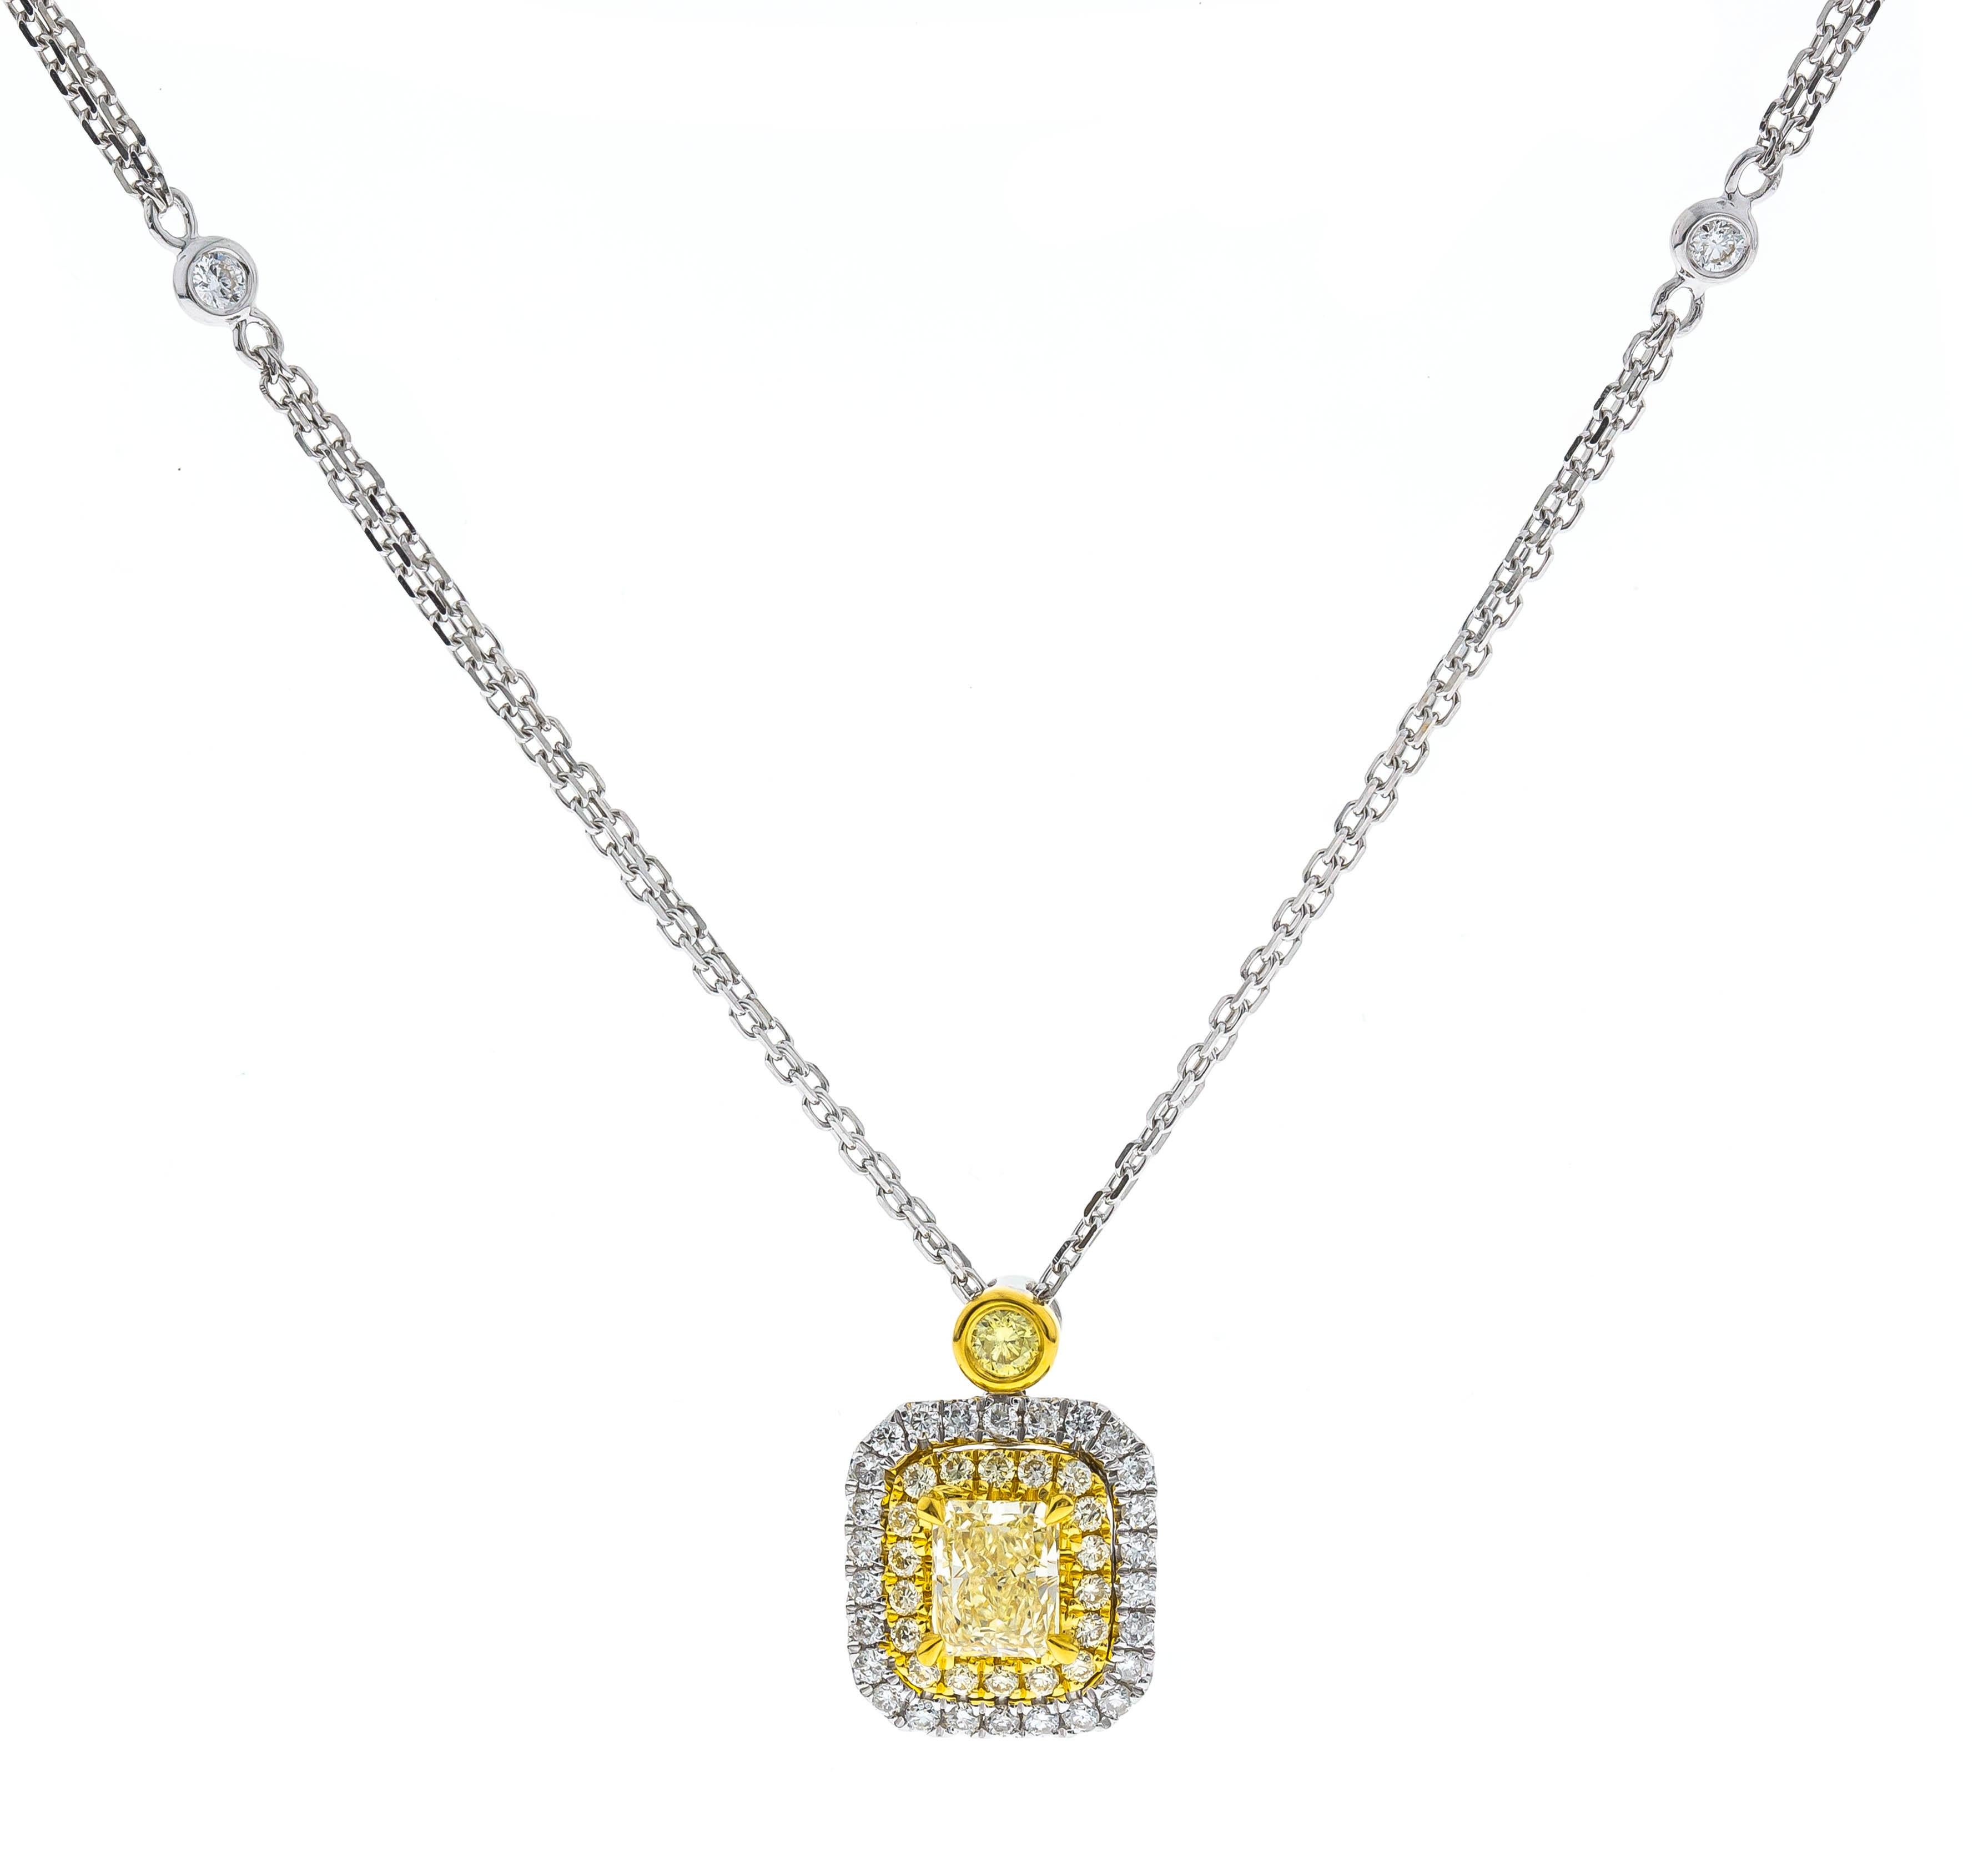 This beautiful Necklace is crafted in 18-karat Two Tone gold and features a cushion cut Yellow Diamond 0.77 Carat, SI Clarity and is surrounded by 19 Yellow Diamonds 0.17 Carat & 30 Round Diamonds 0.23 Carat. 
This Necklace is 18 inched in length